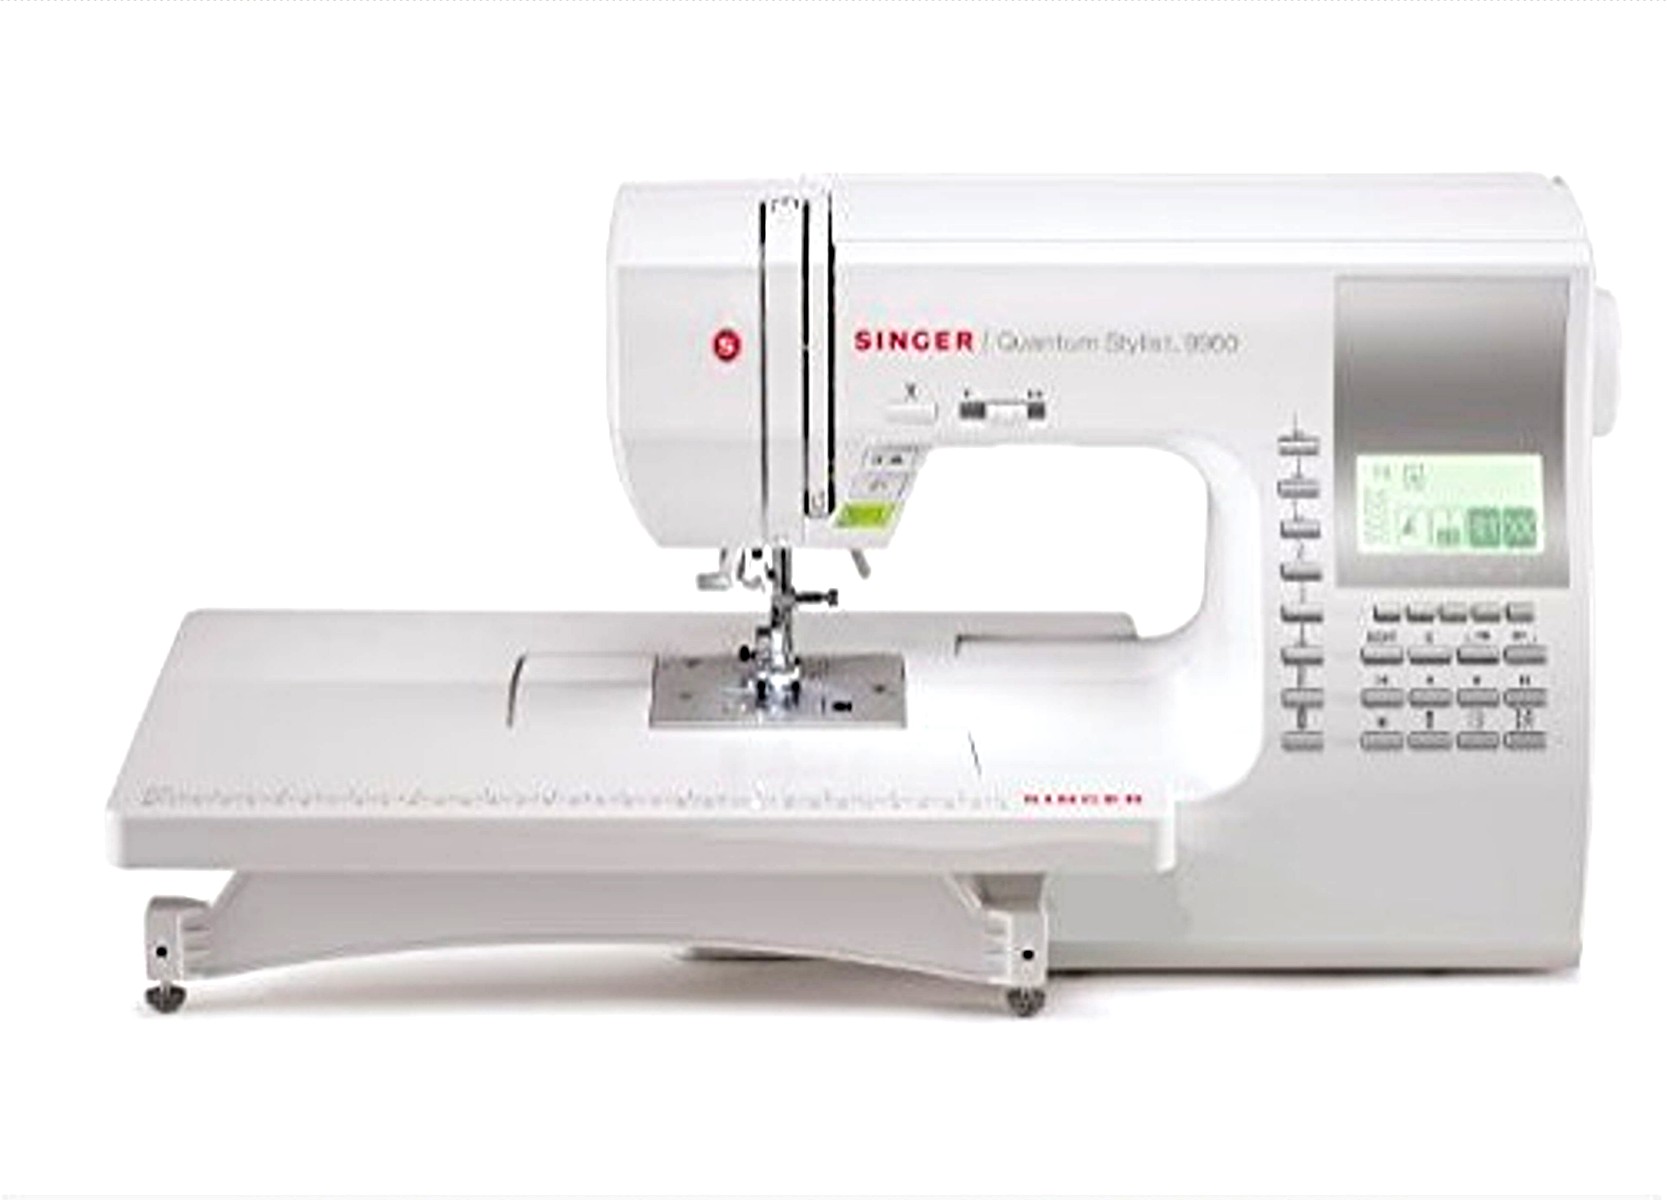 Live - See What Customers Are Saying About The Top-Rated SINGER 9960  Quantum Stylist Sewing Machine